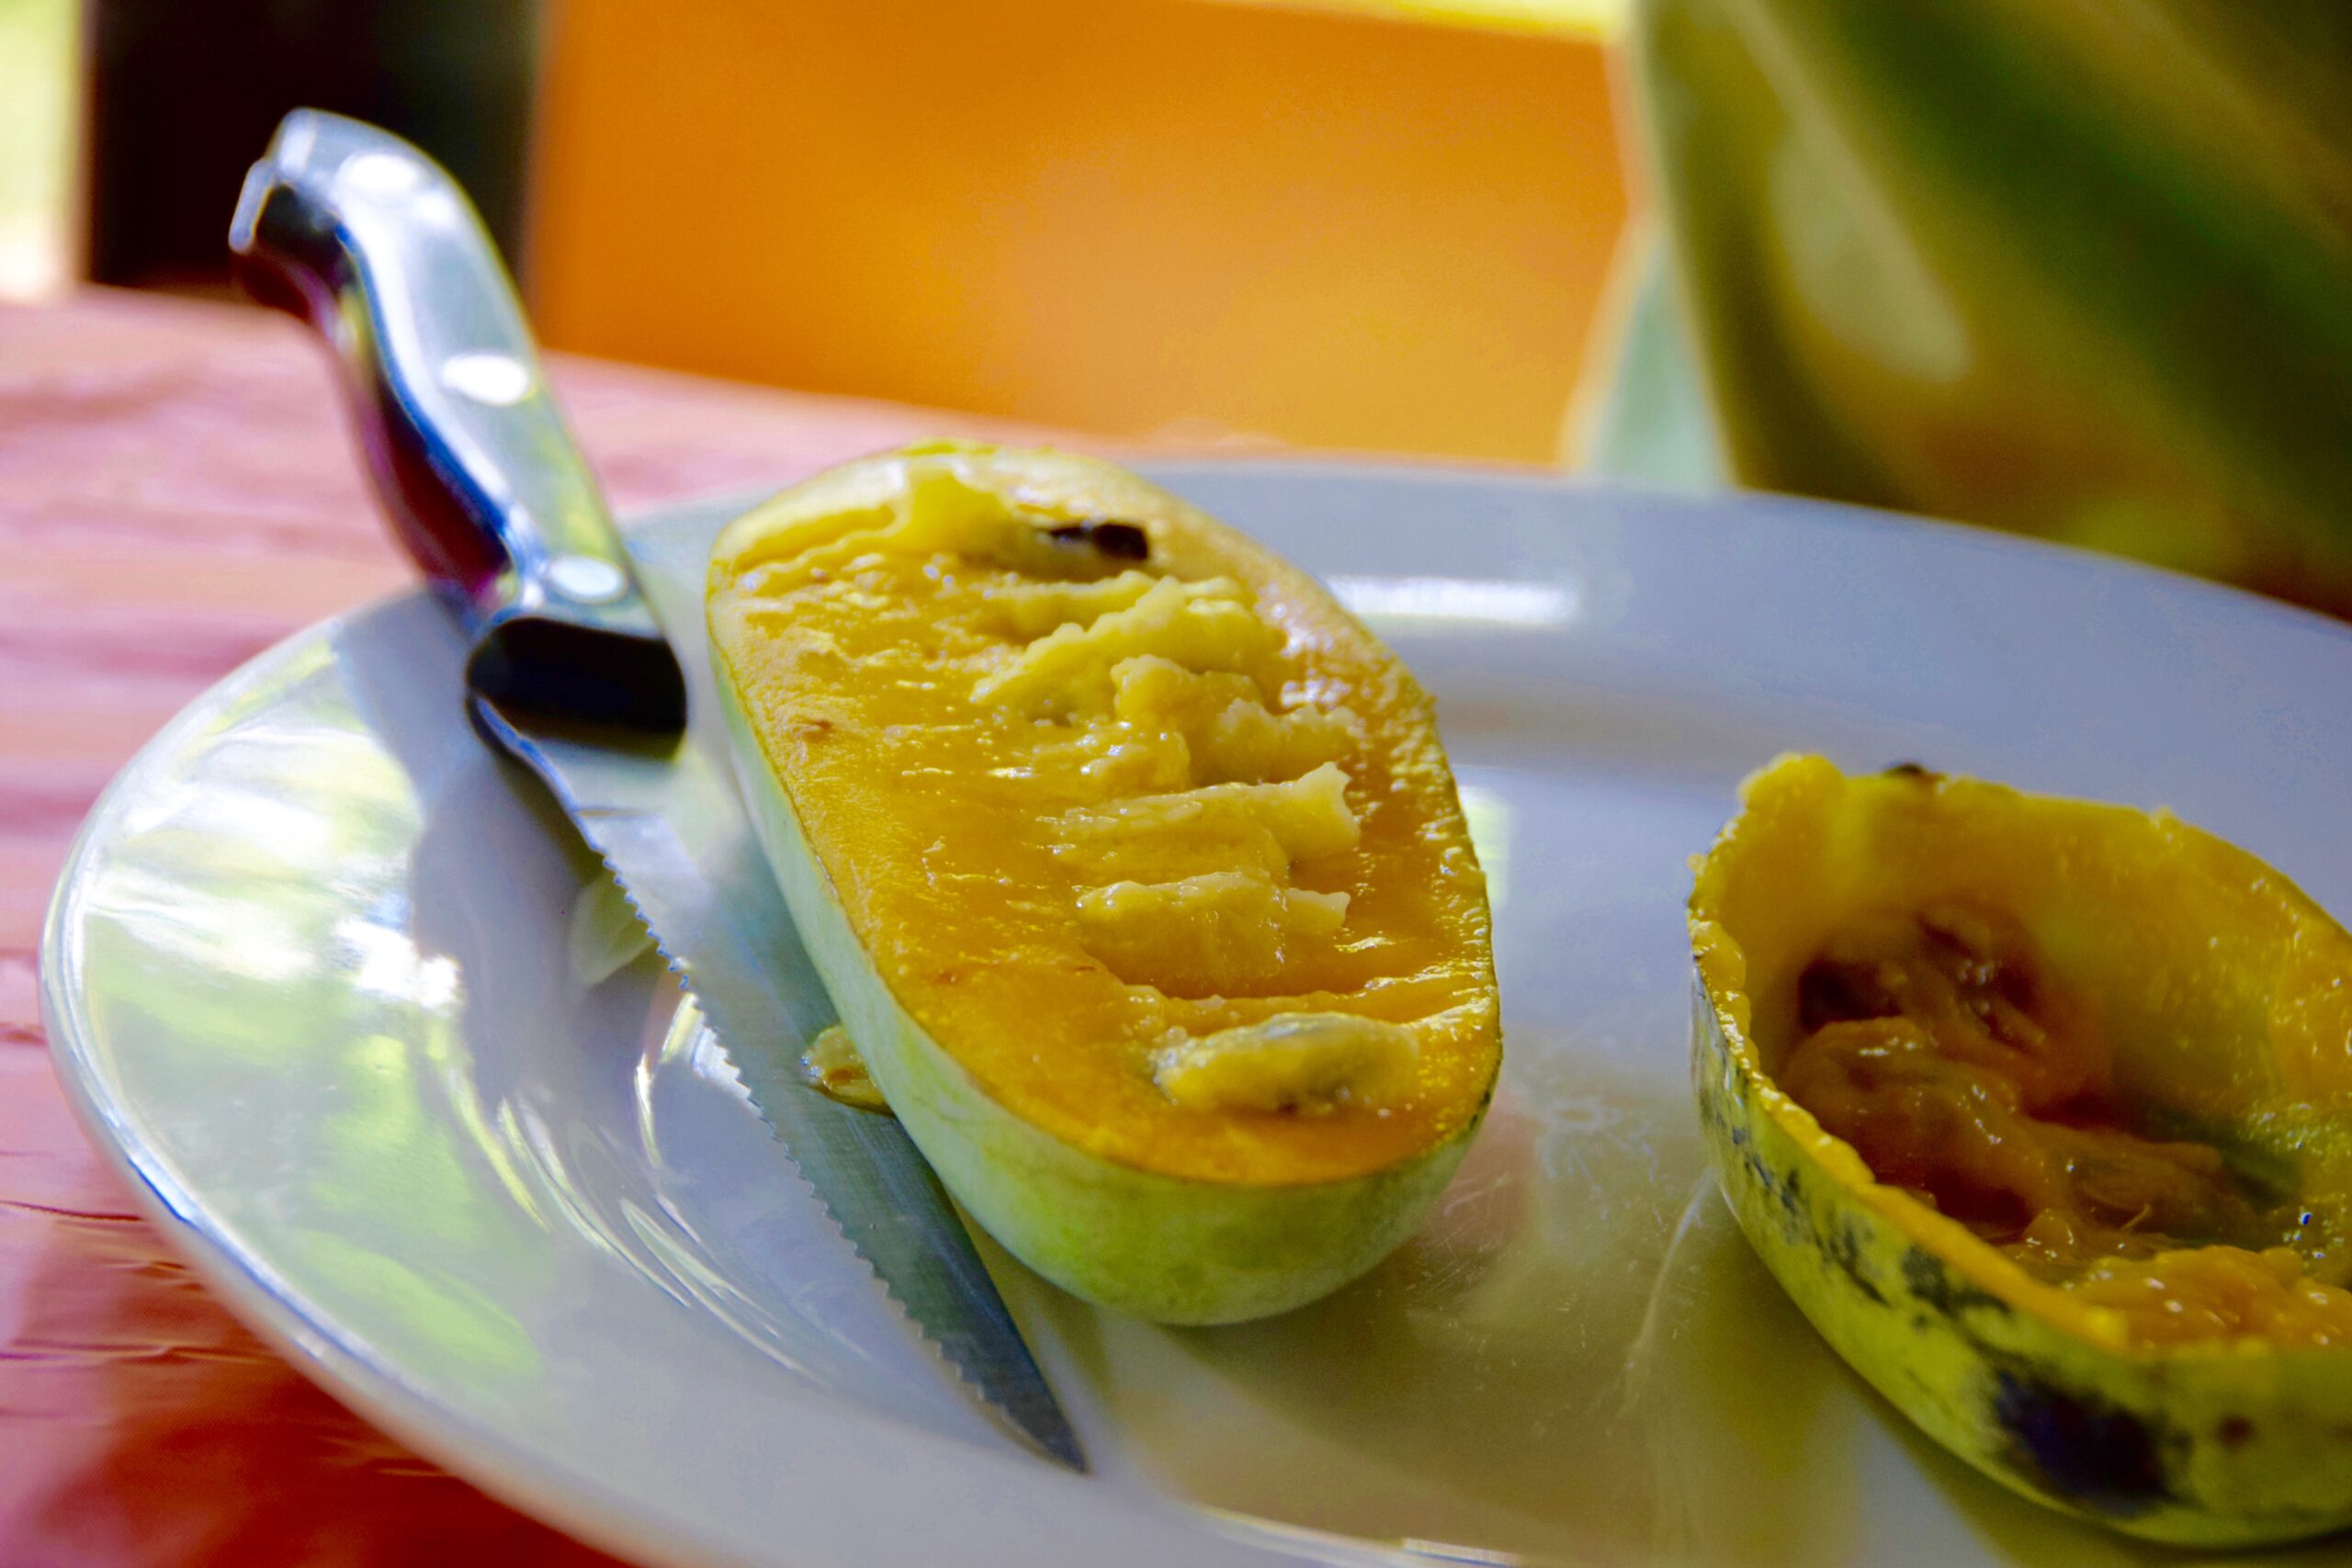 Taste the Tropical Flavors of the Pawpaw Fruit